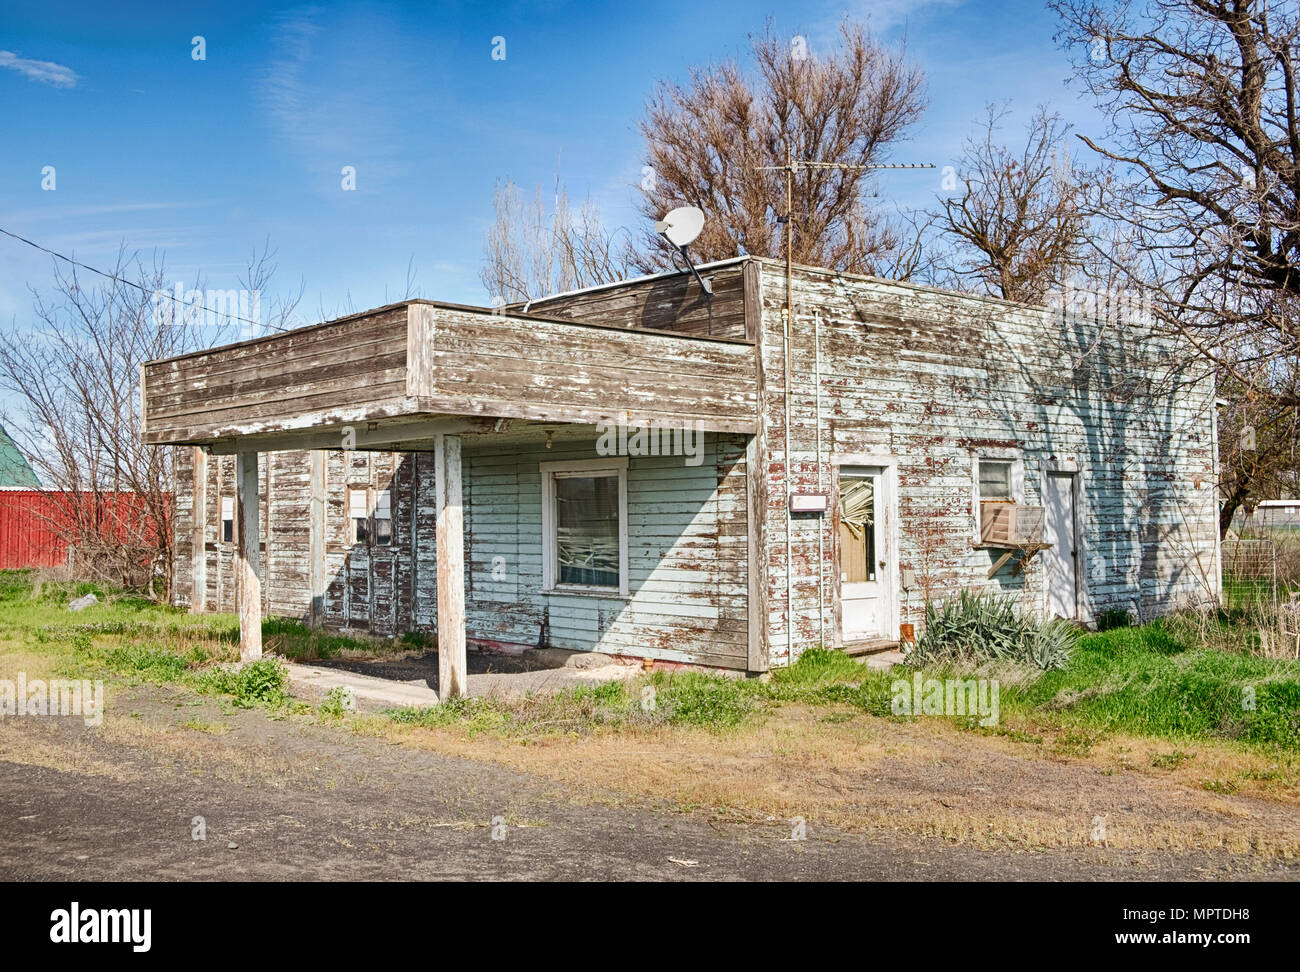 An old service station by the side of the highway in Lowden, Washington with a covered service area is gradually falling apart. Stock Photo